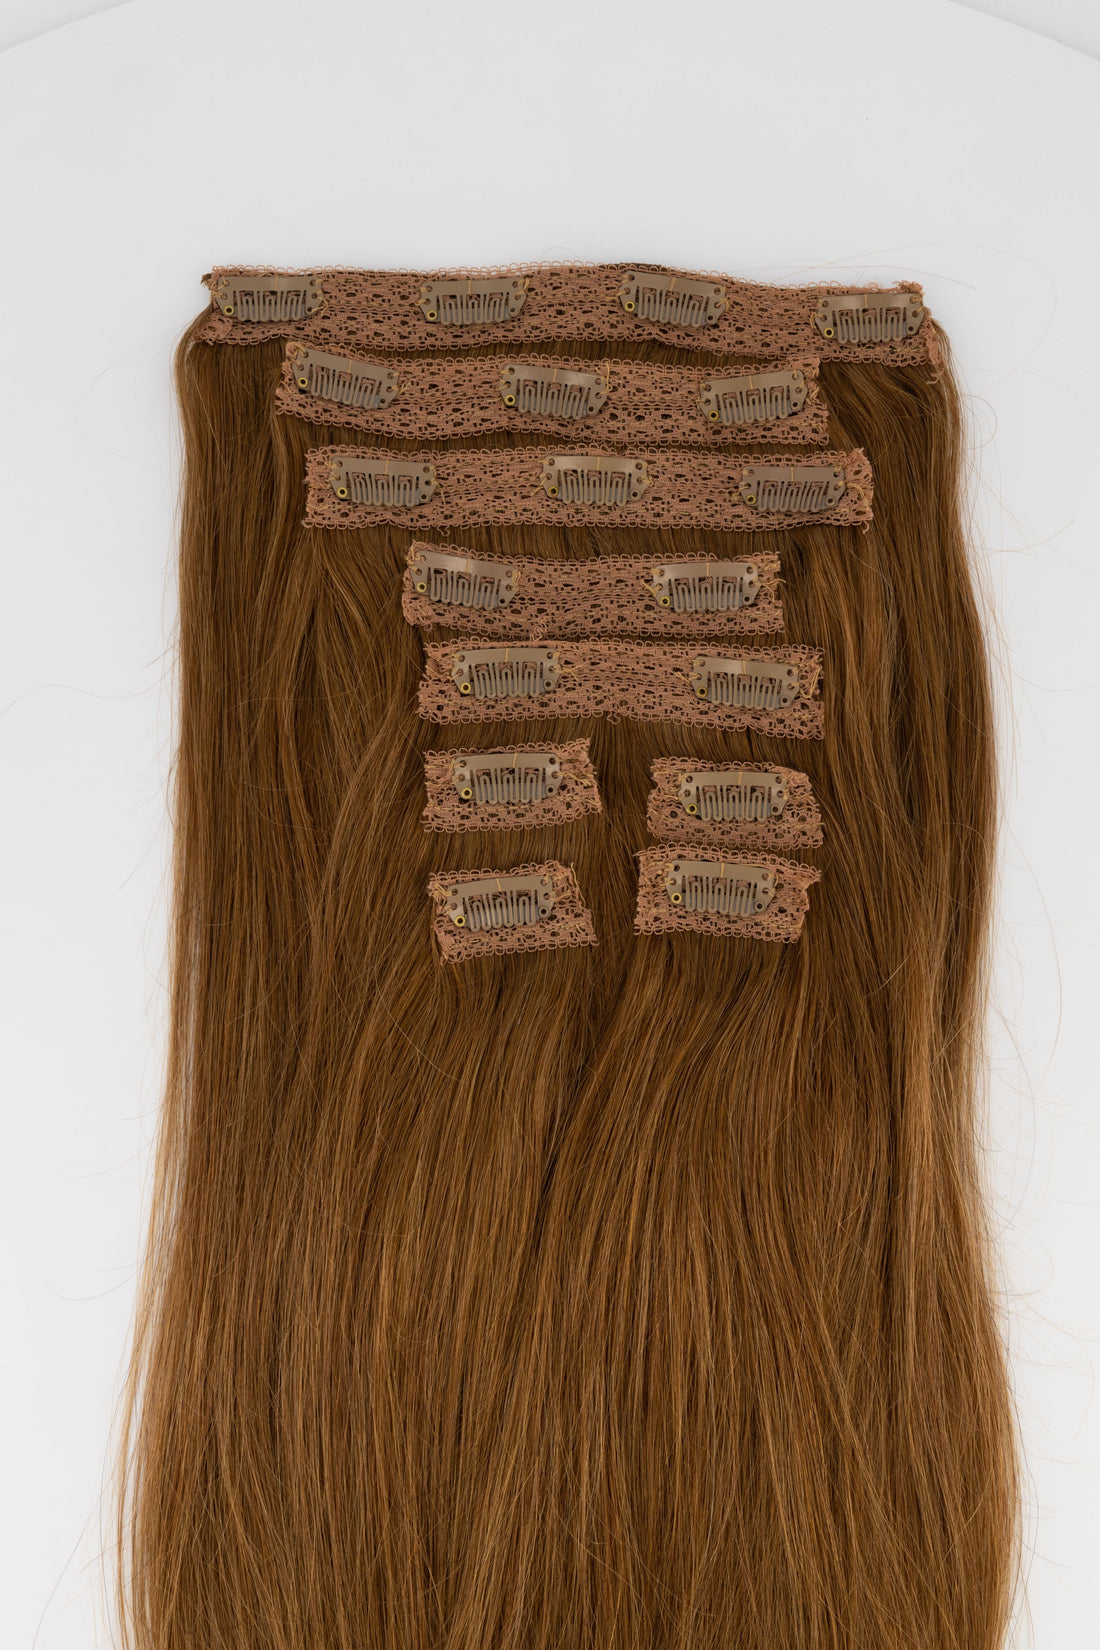 Frontrow clip-in hair extensions in chestnut brown